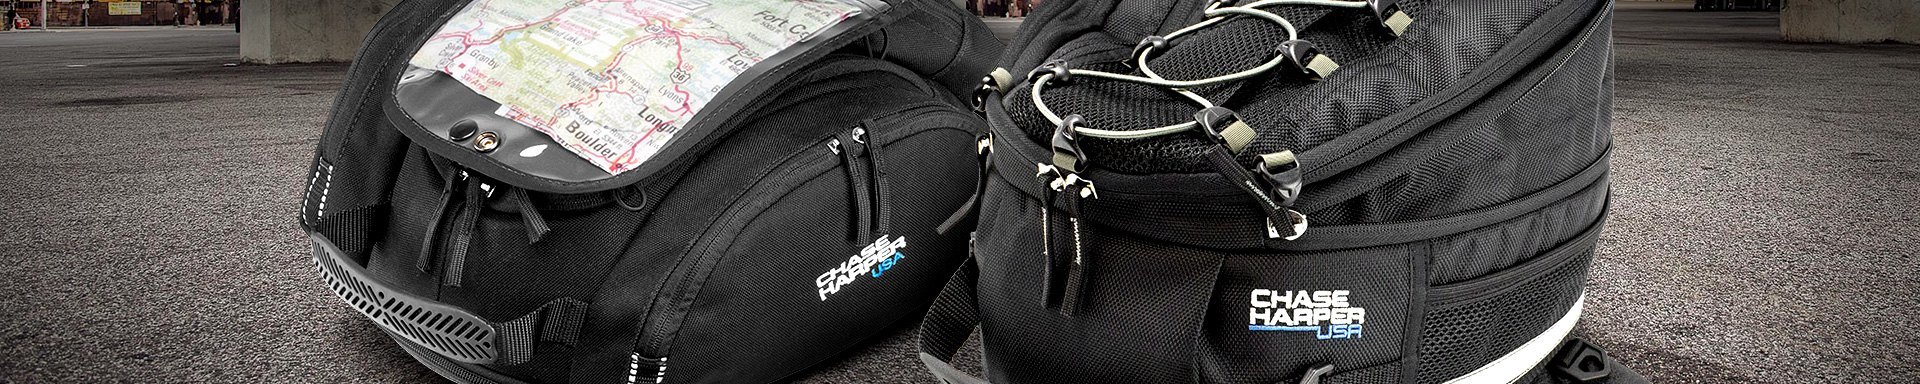 Chase Harper Luggage Systems & Saddlebags